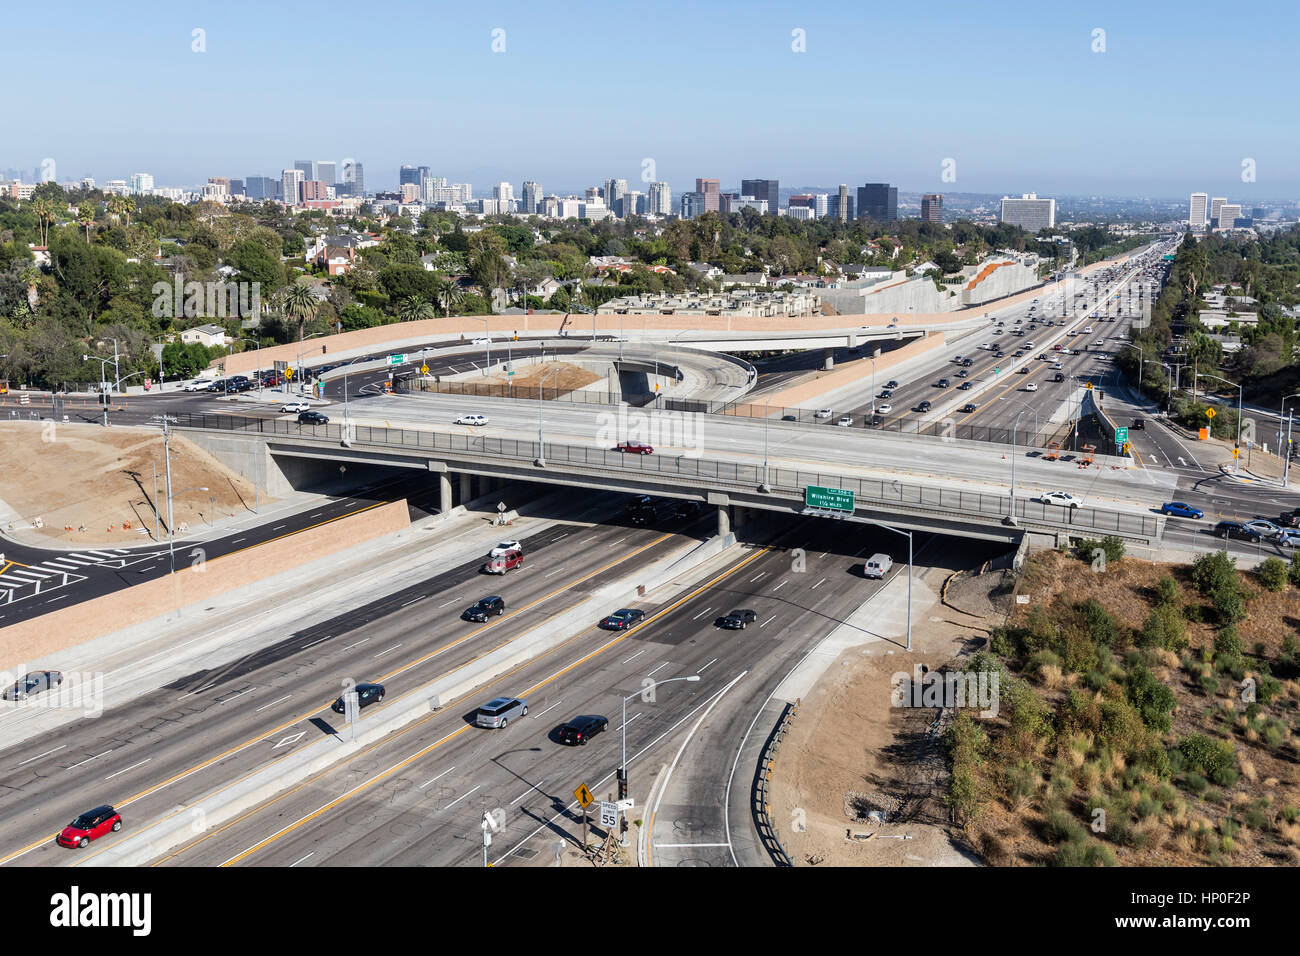 LOS ANGELES, CALIFORNIA - August 17, 2014:  Sunday afternoon traffic on Los Angeles's busy San Diego 405 Freeway at Sunset Blvd. Stock Photo